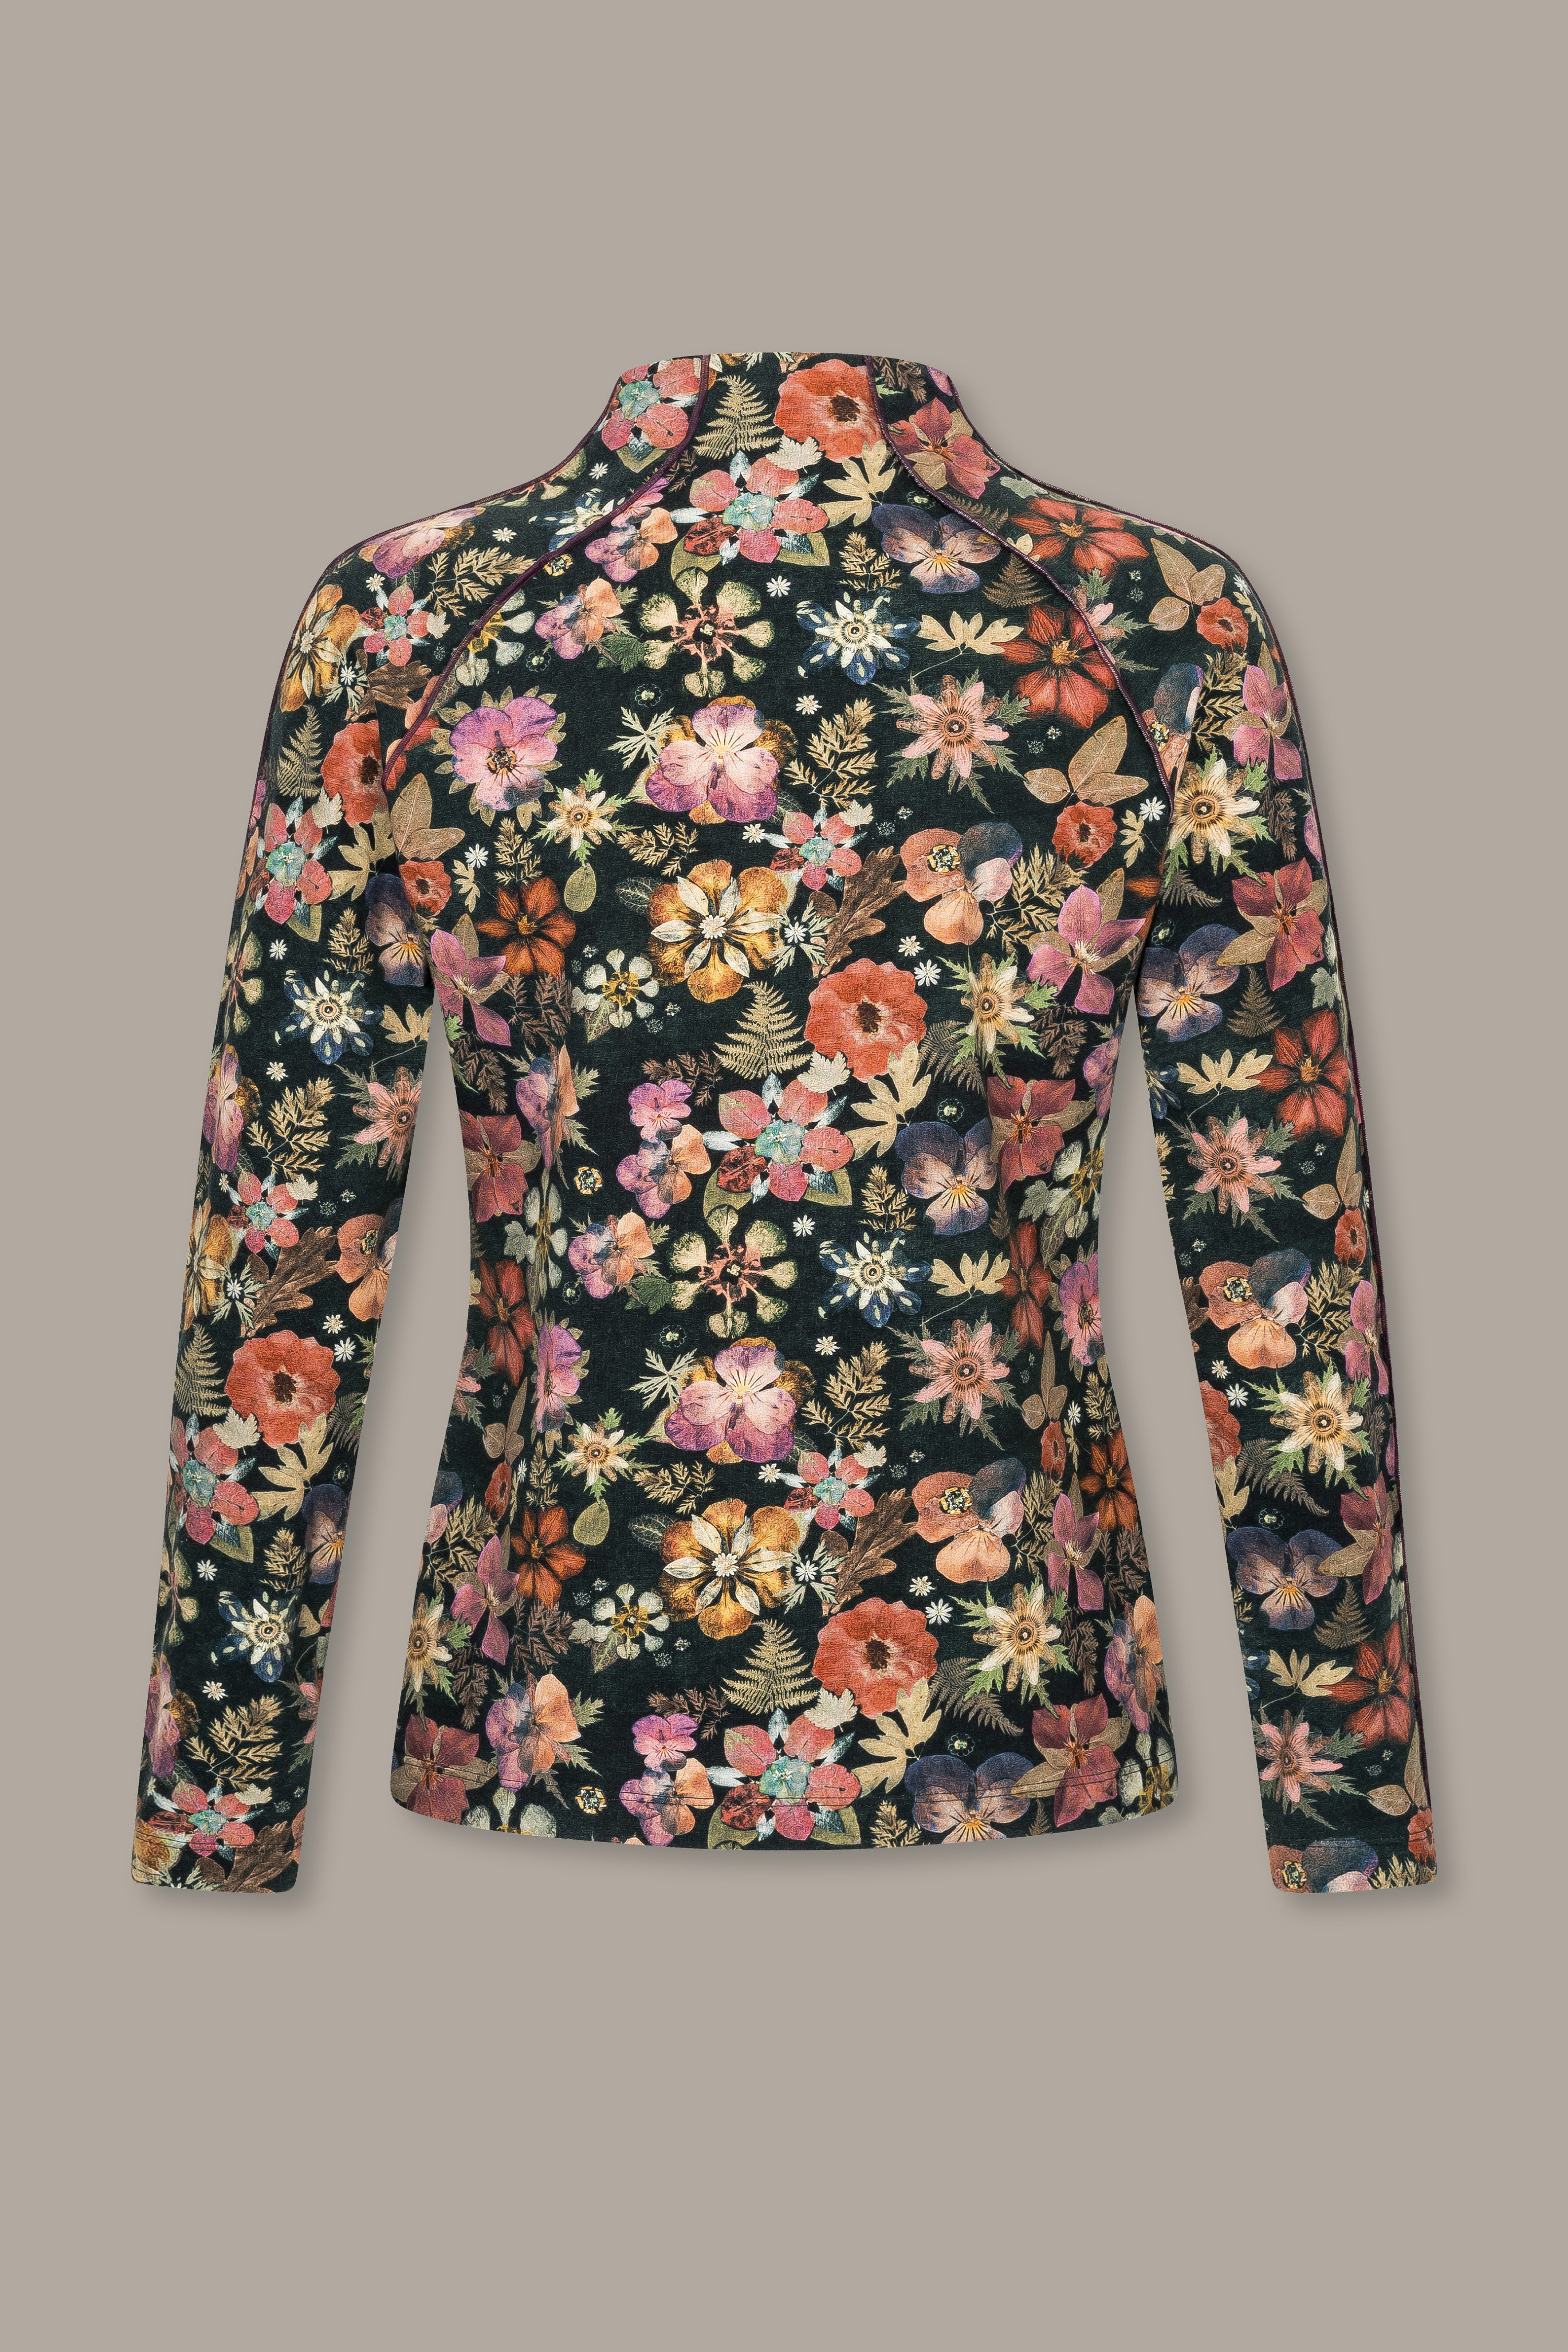 Stand-up collar shirt with a print